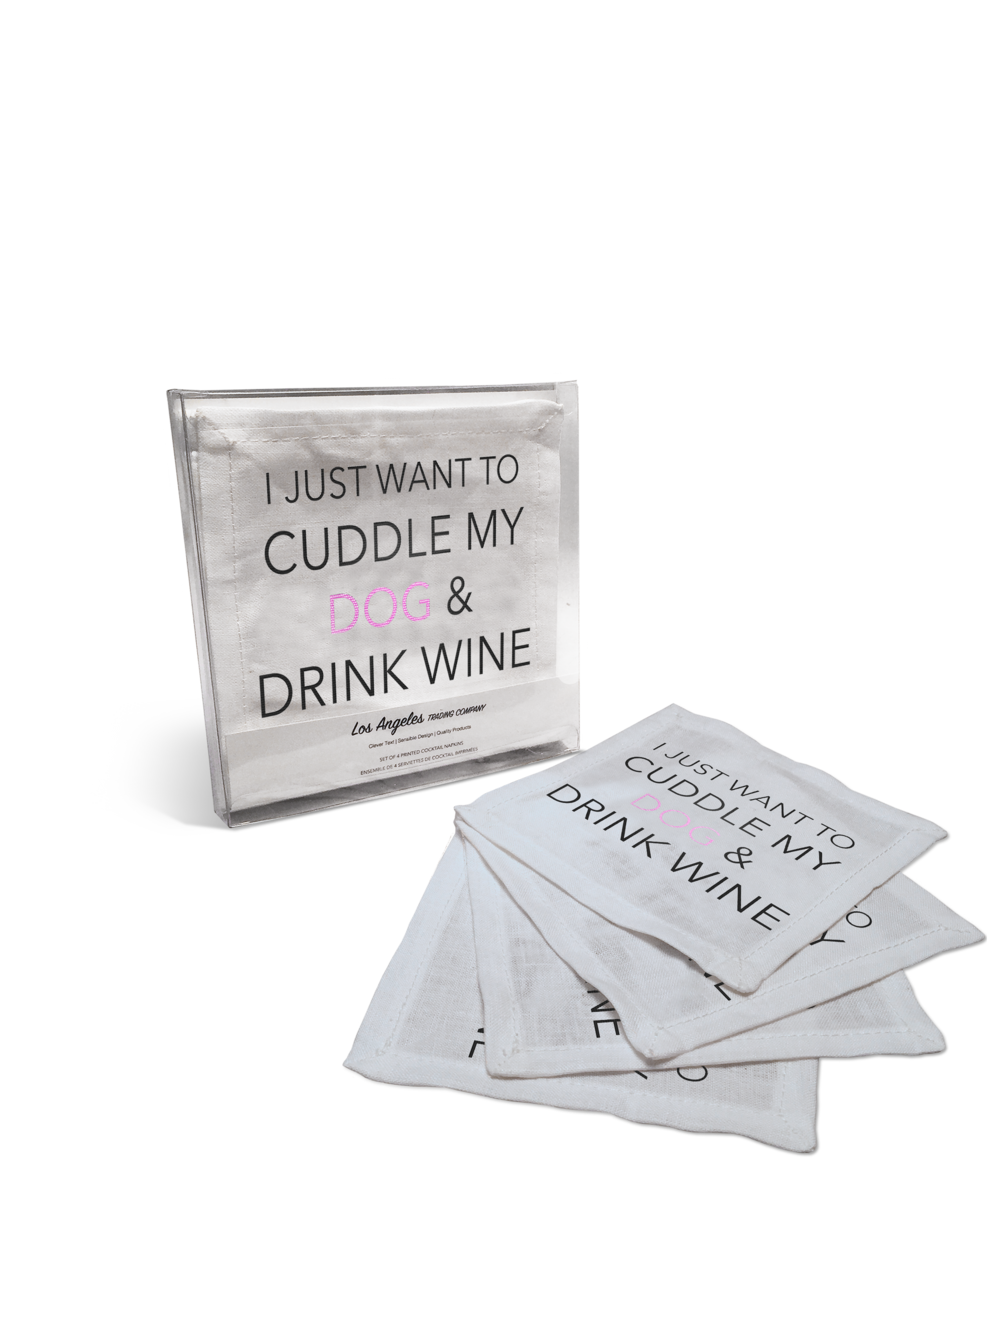 Linen Cocktail Napkins - I Just Want to Cuddle My Dog & Drink Wine - Boxed Set Of 4 napkins